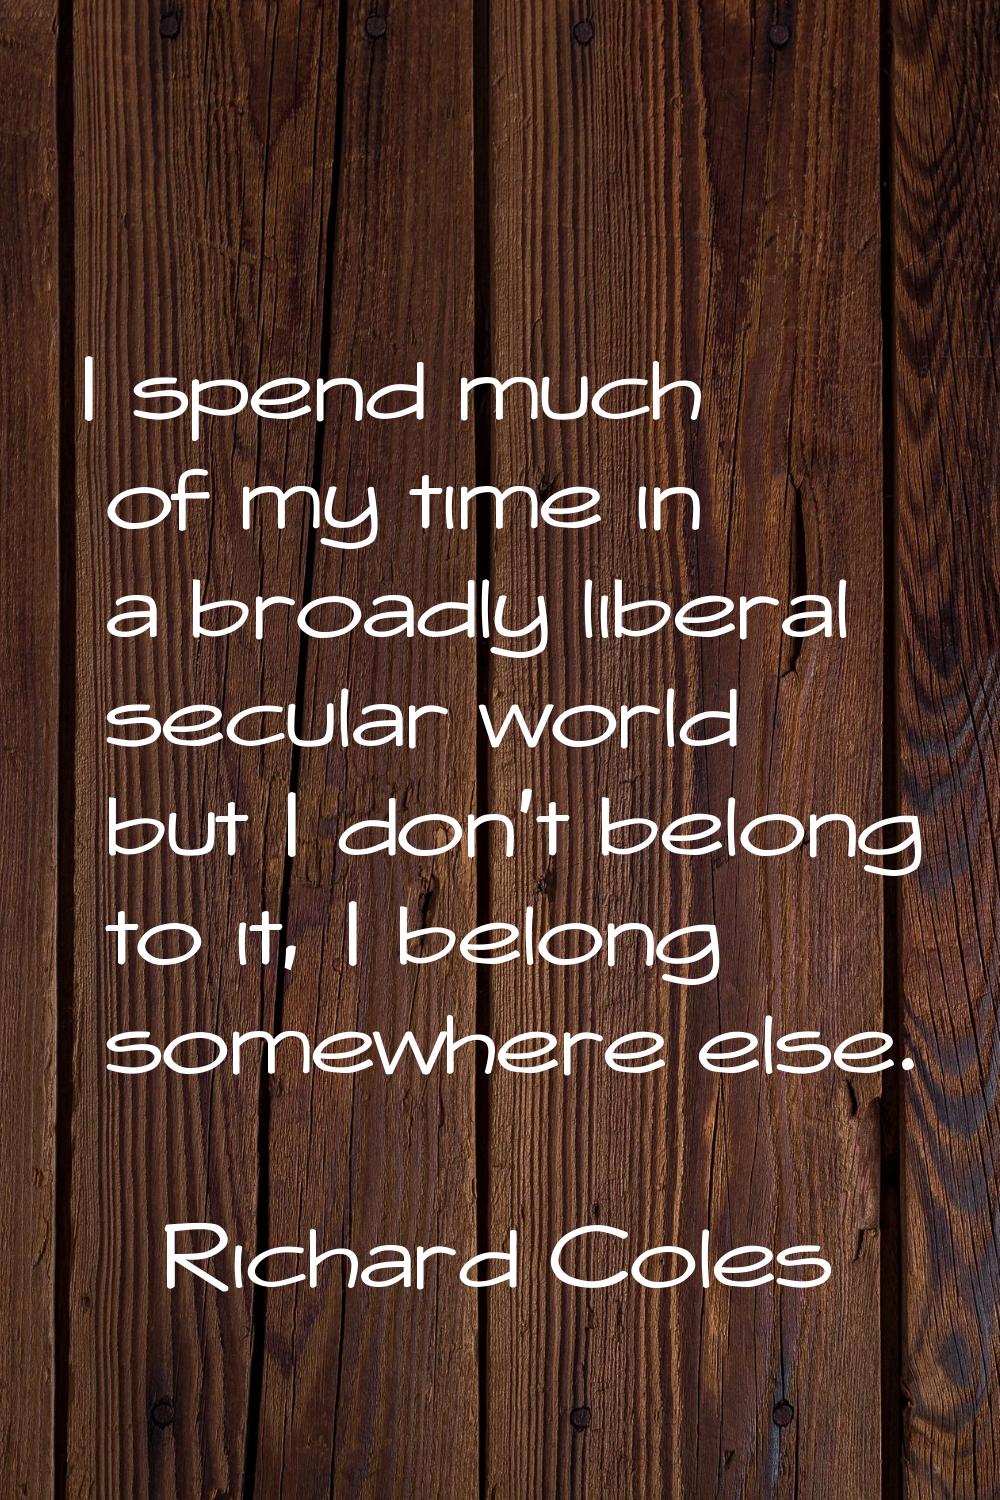 I spend much of my time in a broadly liberal secular world but I don't belong to it, I belong somew